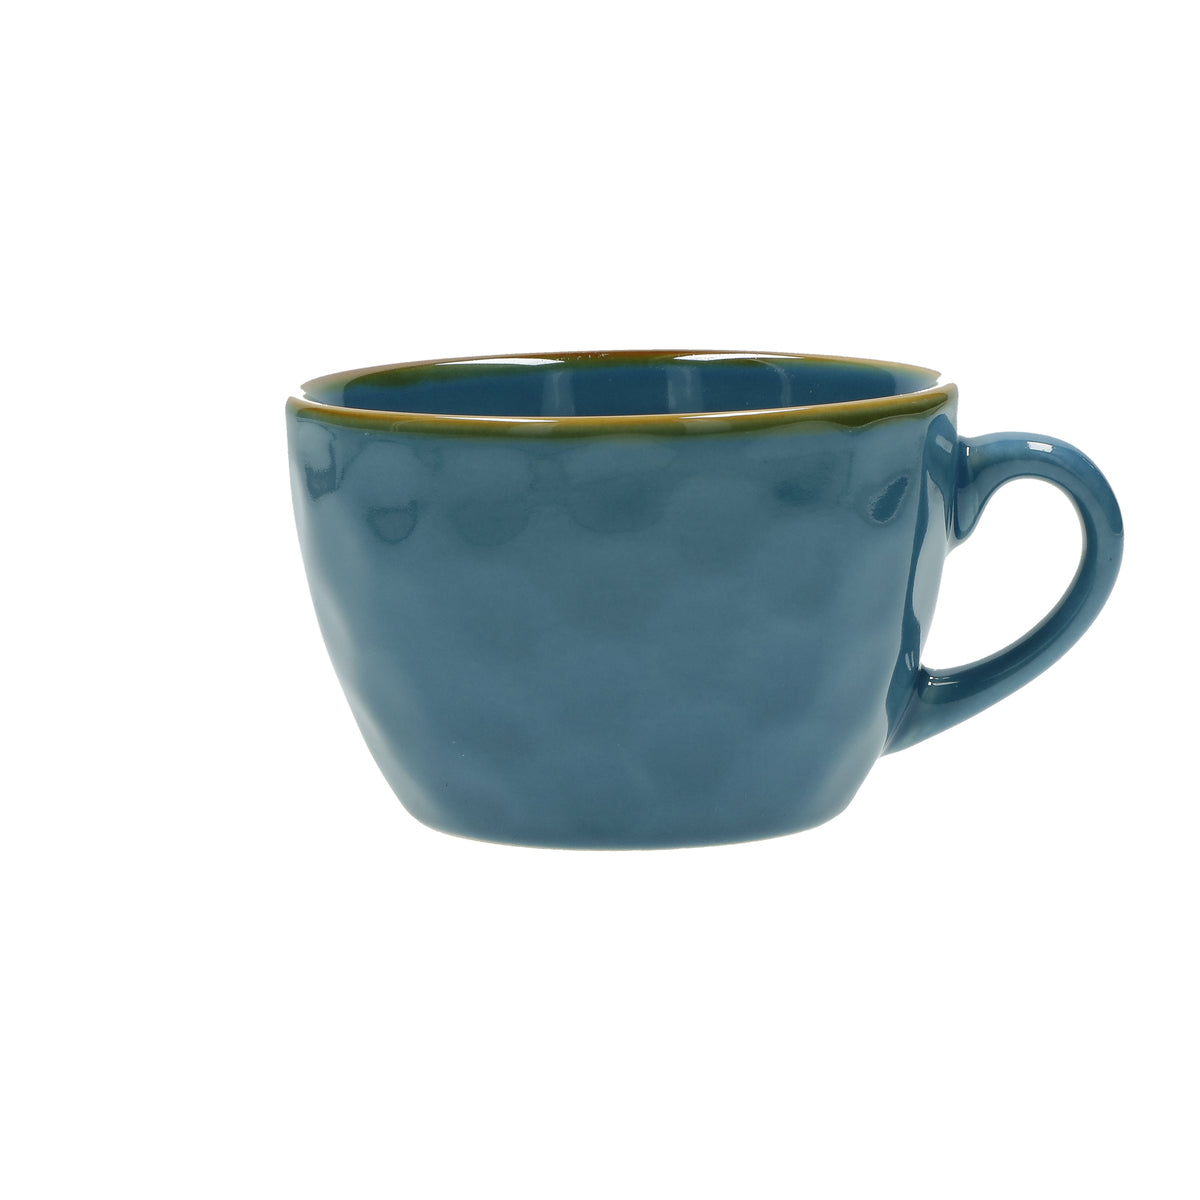 Rose & Tulipani - Concerto Breakfast Cup - Available in 6 Colours